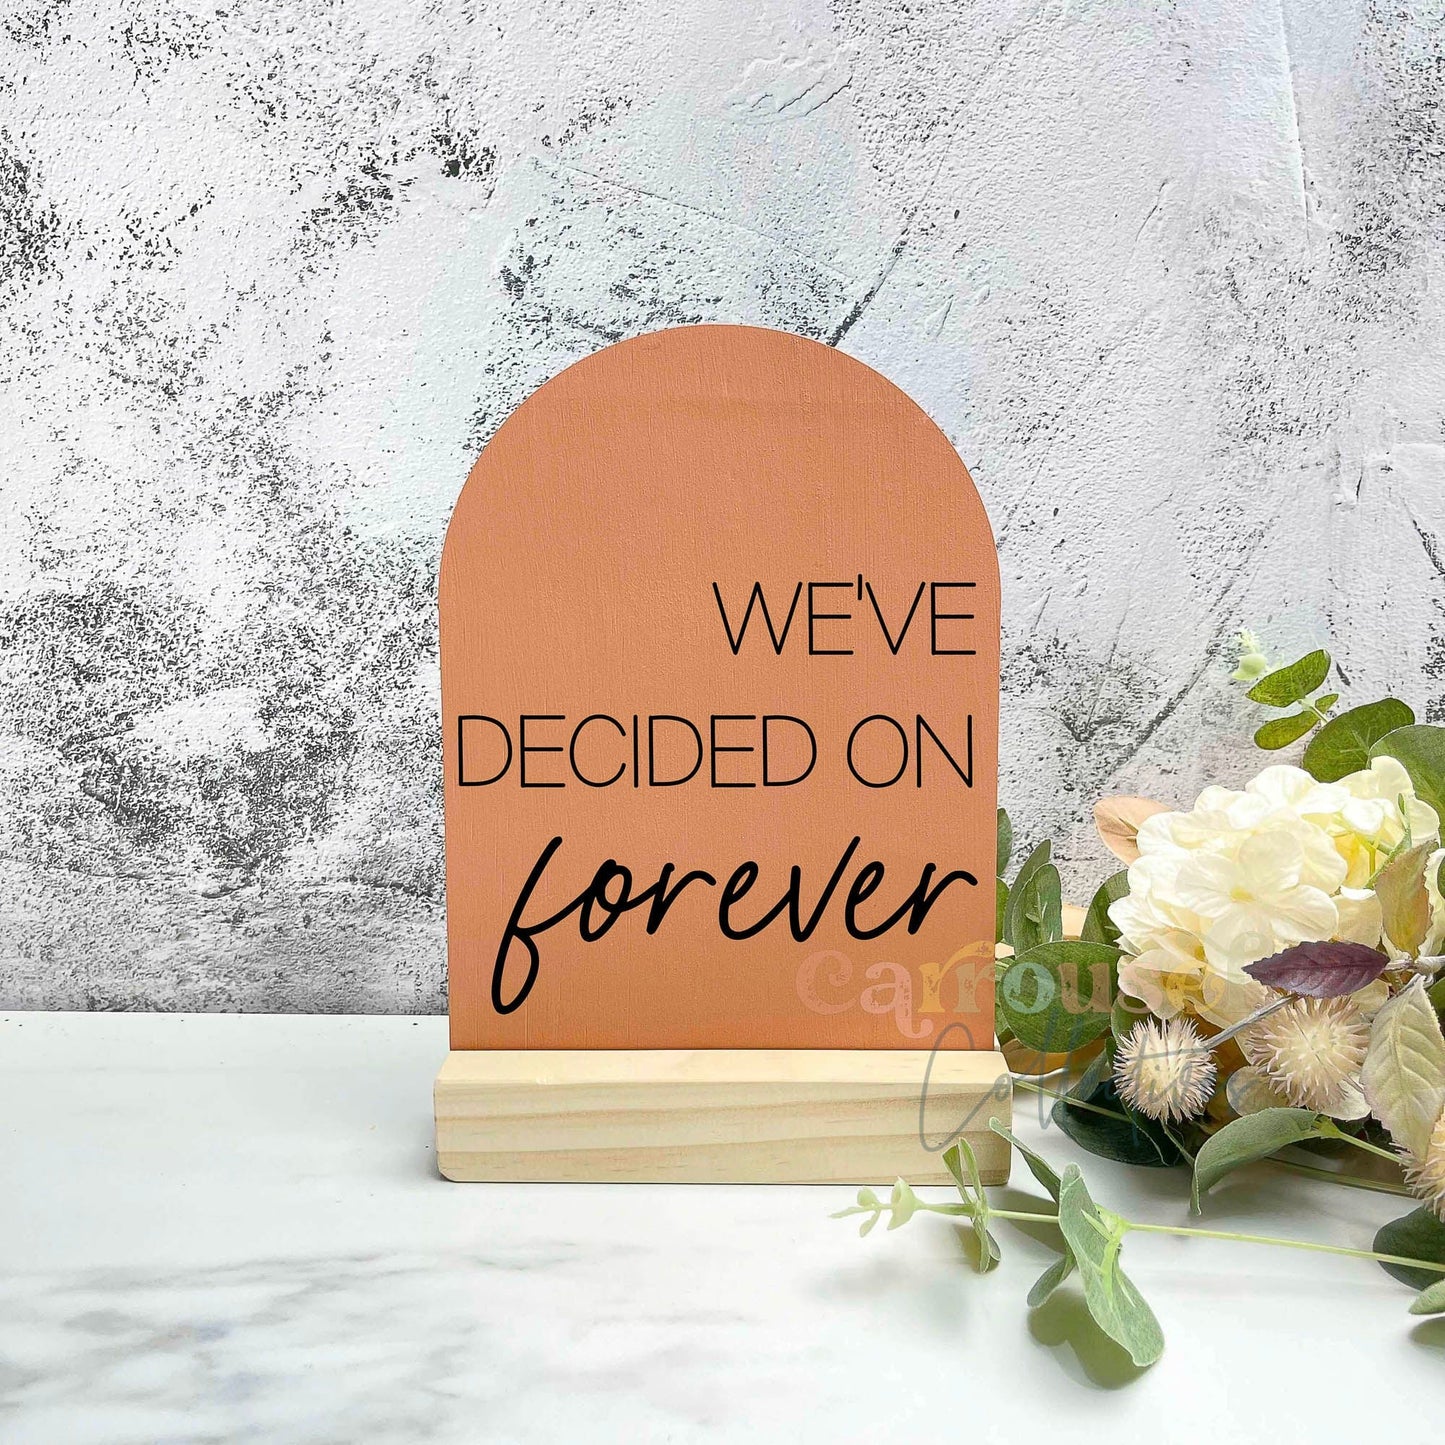 We decided on forever acrylic sign, adult quote signs, adult decor, bedroom decor